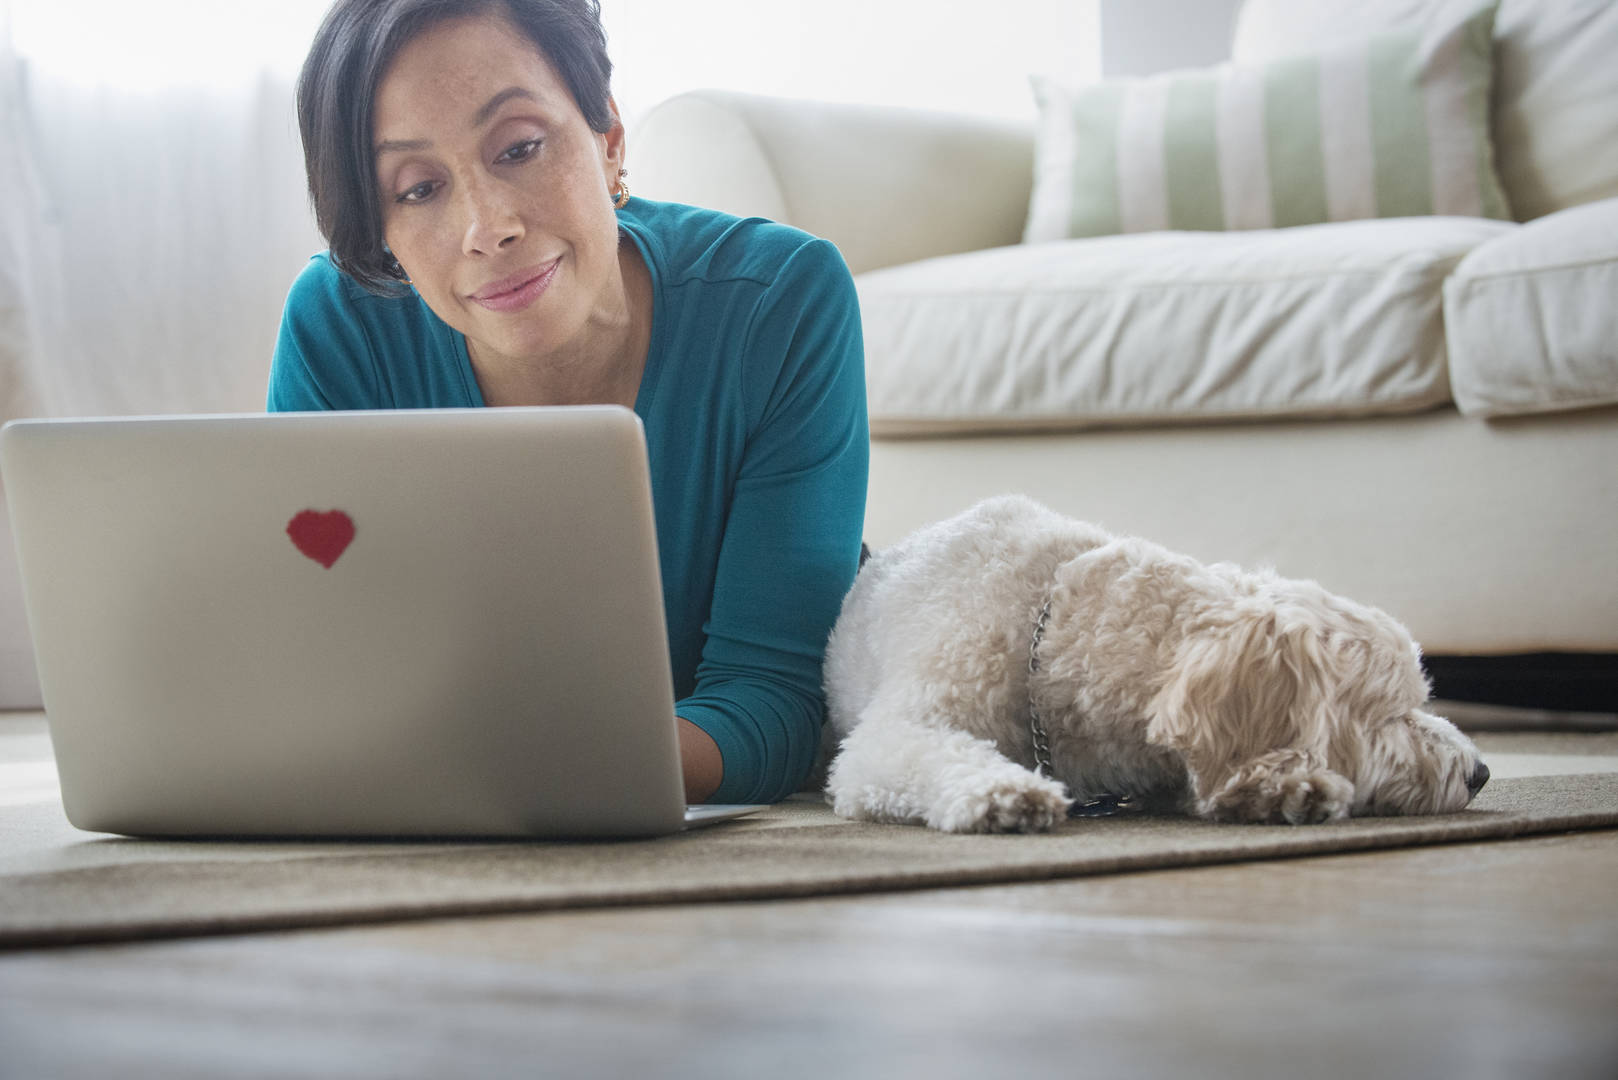 Black woman looks at laptop with small dog by her side